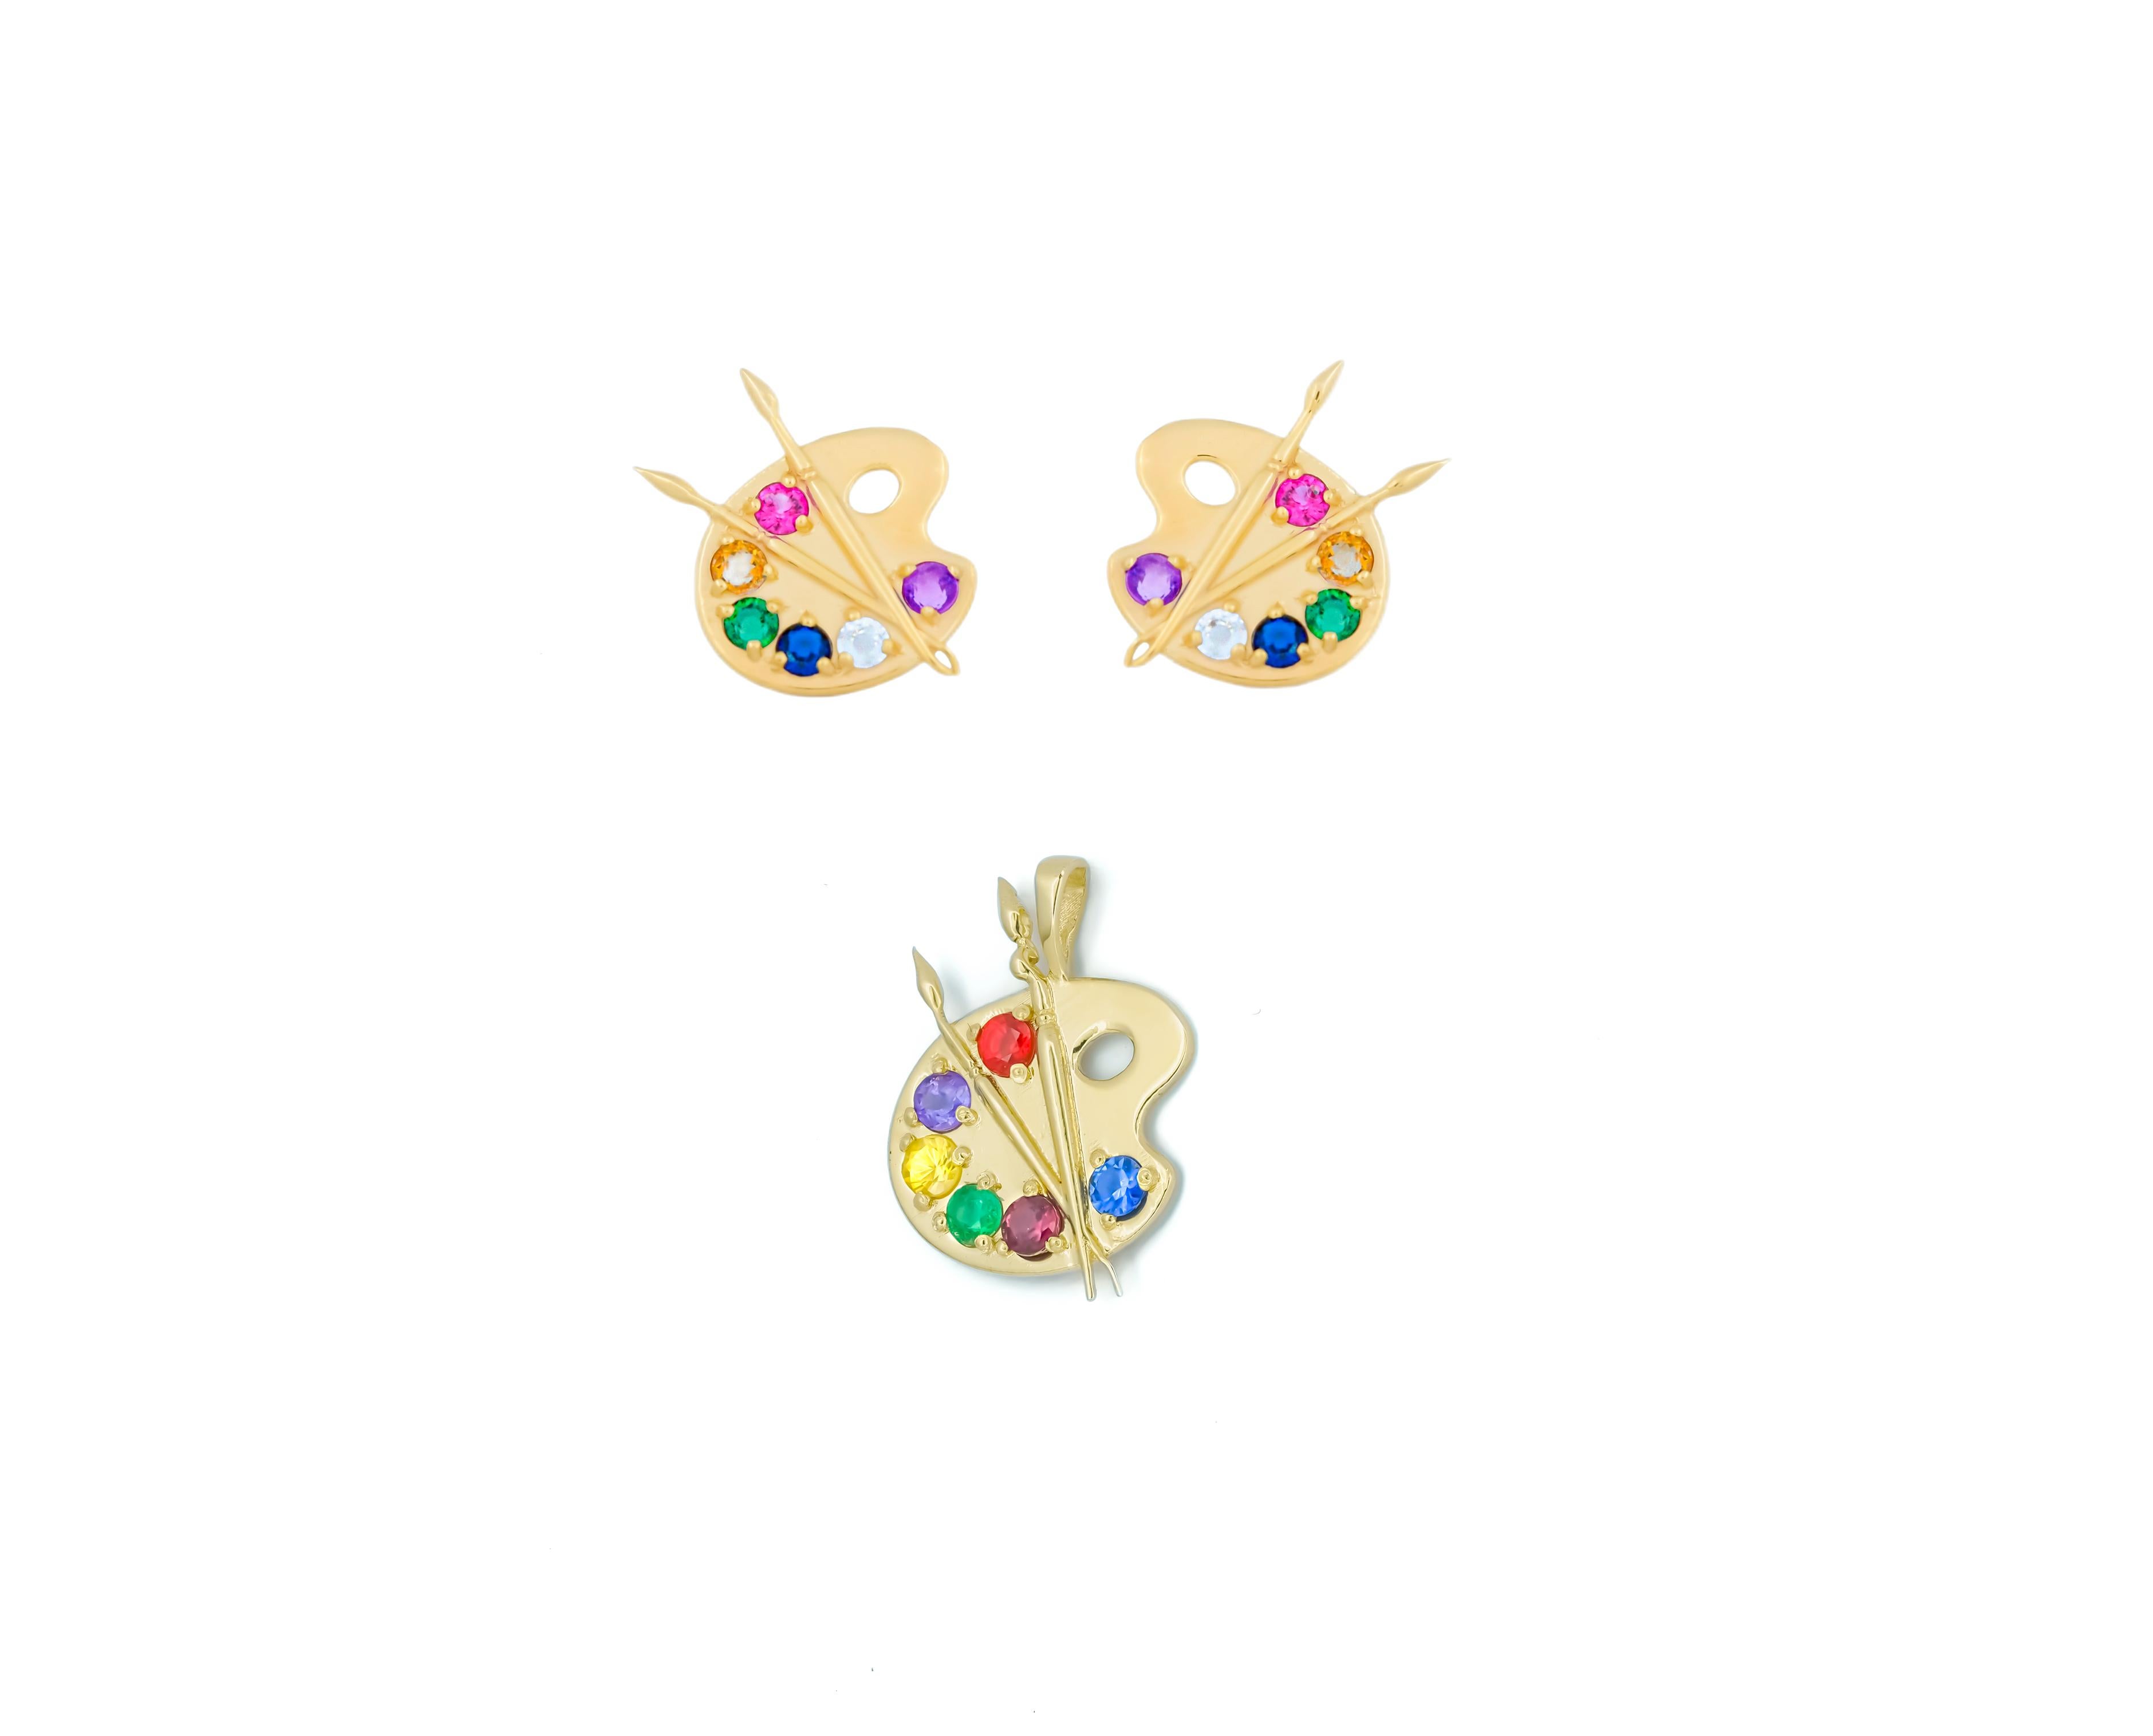 Artist Palette set: earrings and pendant in 14k gold.
Multicolor gemstones earrings and pendant. Paint Palette and Brush Earrings and pendant. Artist, Painter Jewelry set.

Metal: 14k gold
14x16 mm size earings
18x16mm size pendant
Weight 3.8